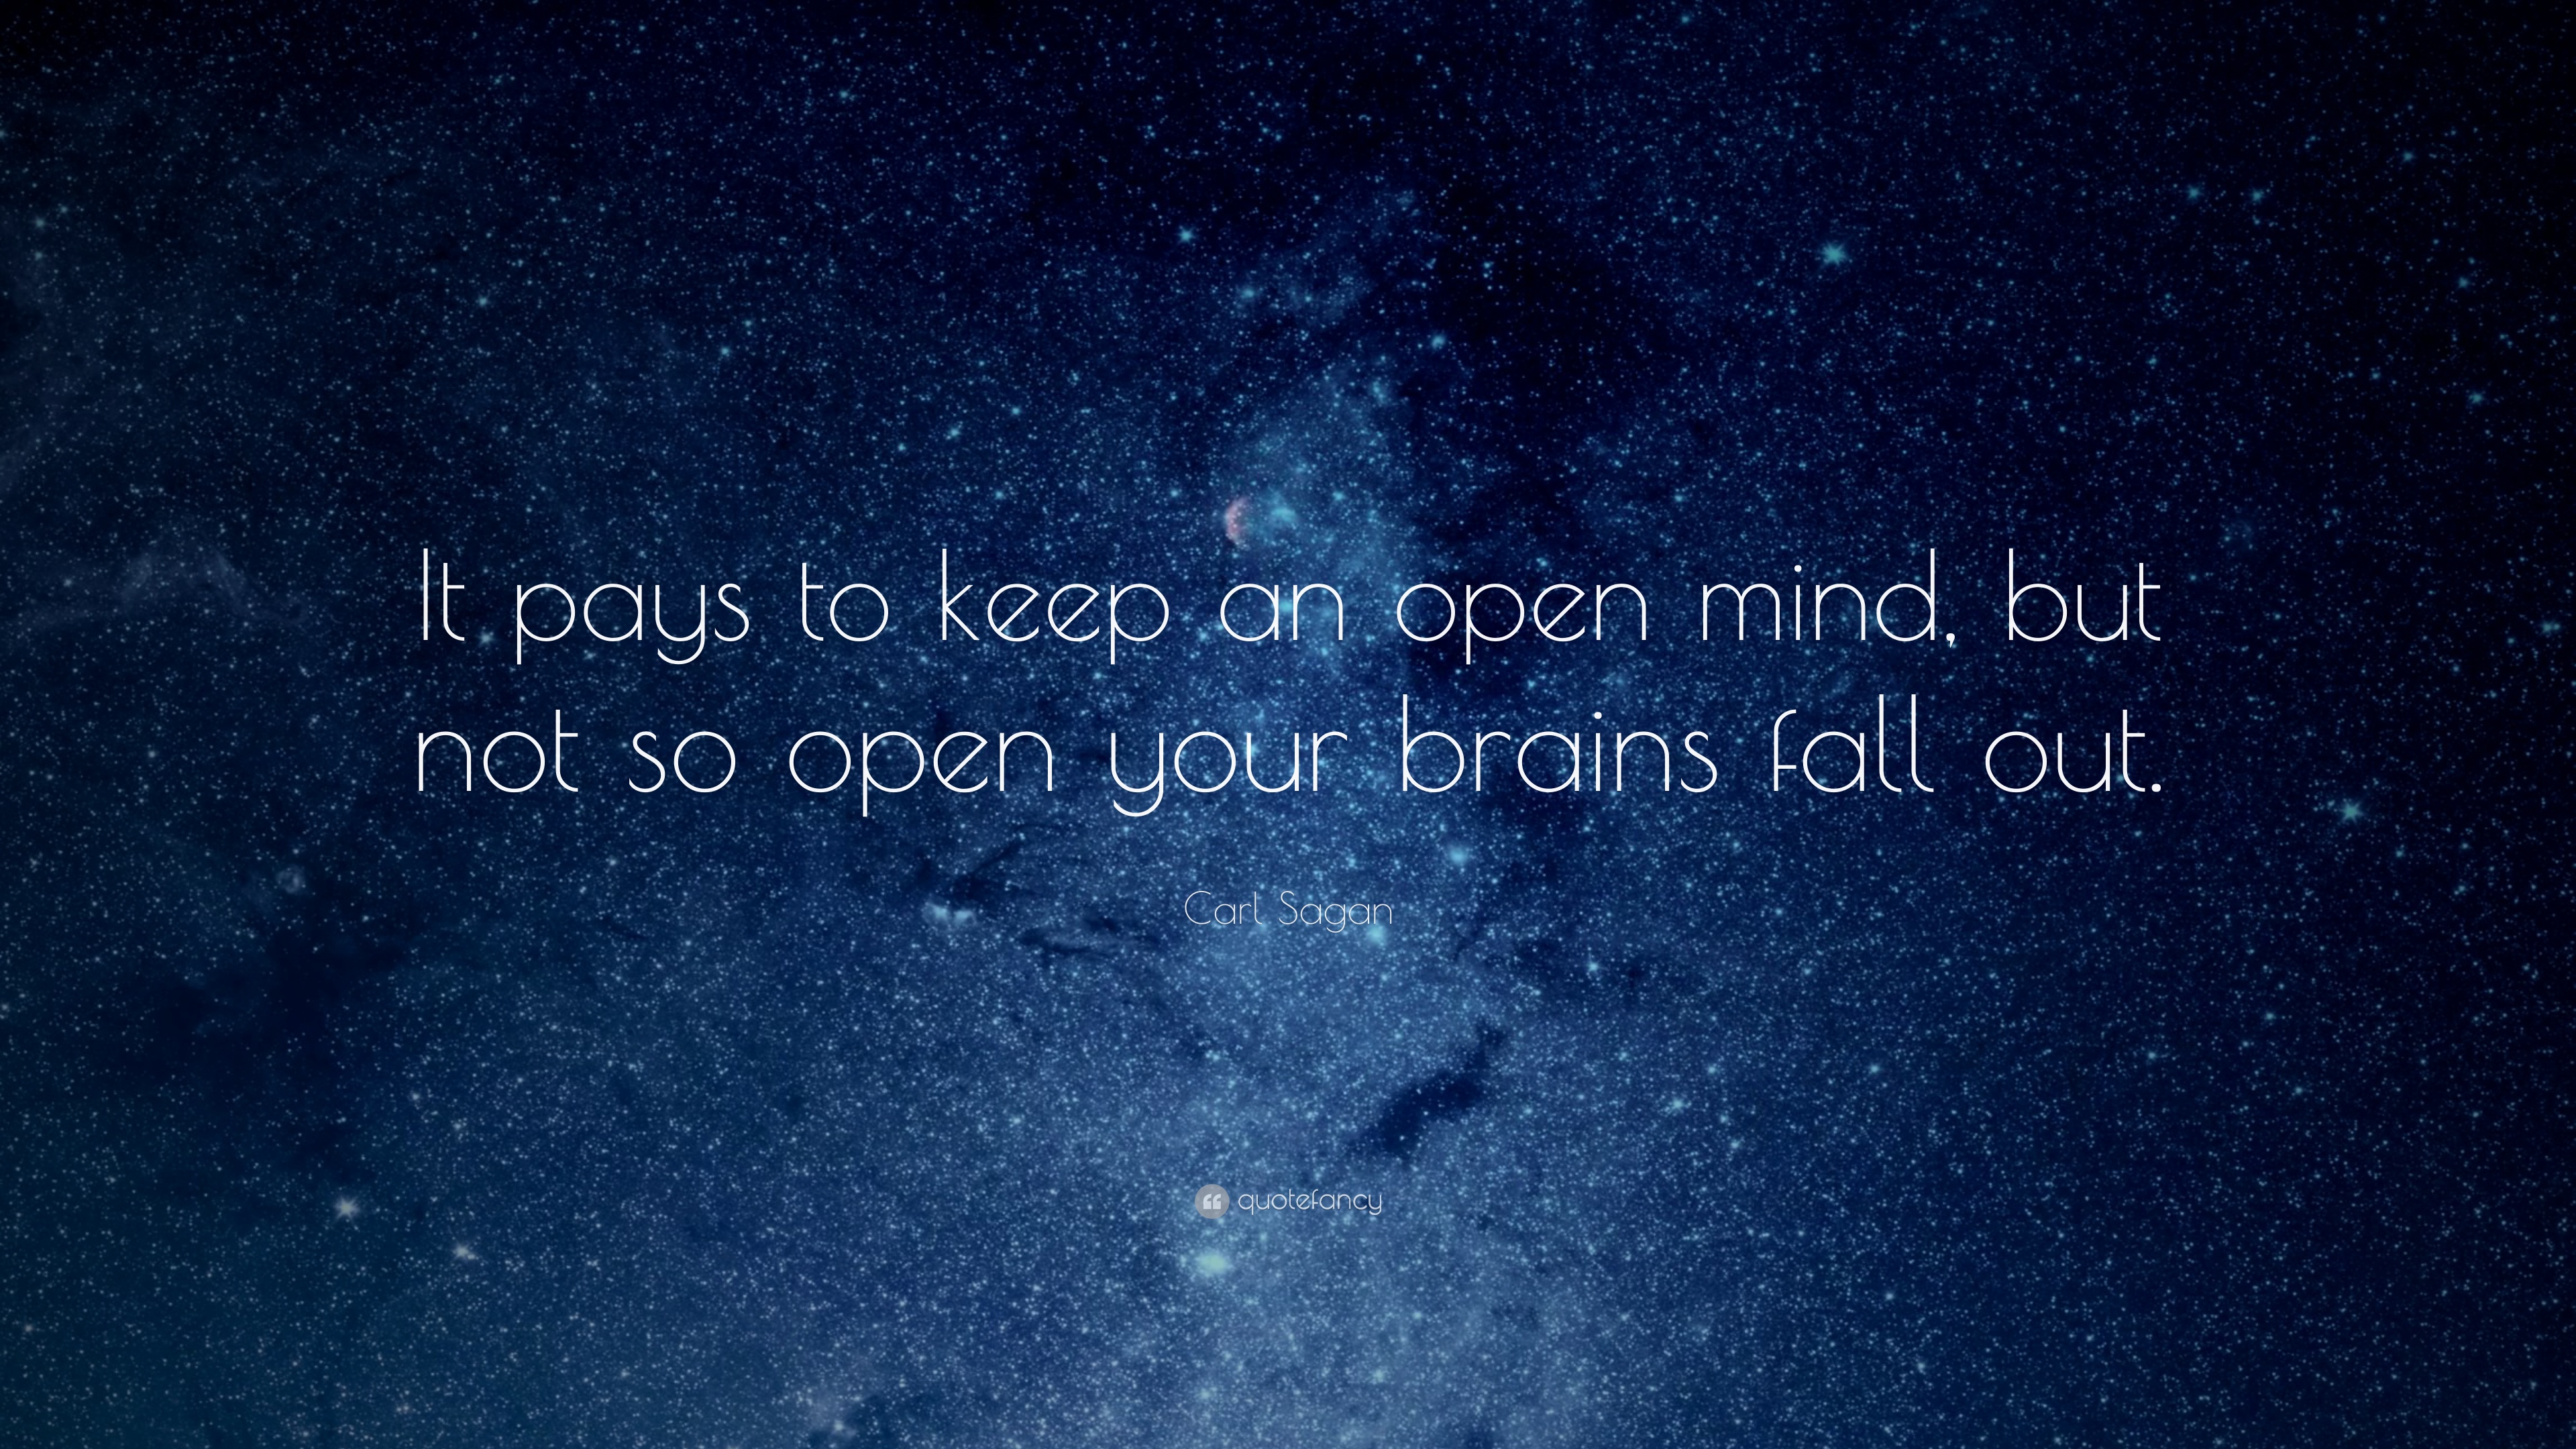 Carl Sagan Quote: “It pays to keep an open mind, but not so open your brains